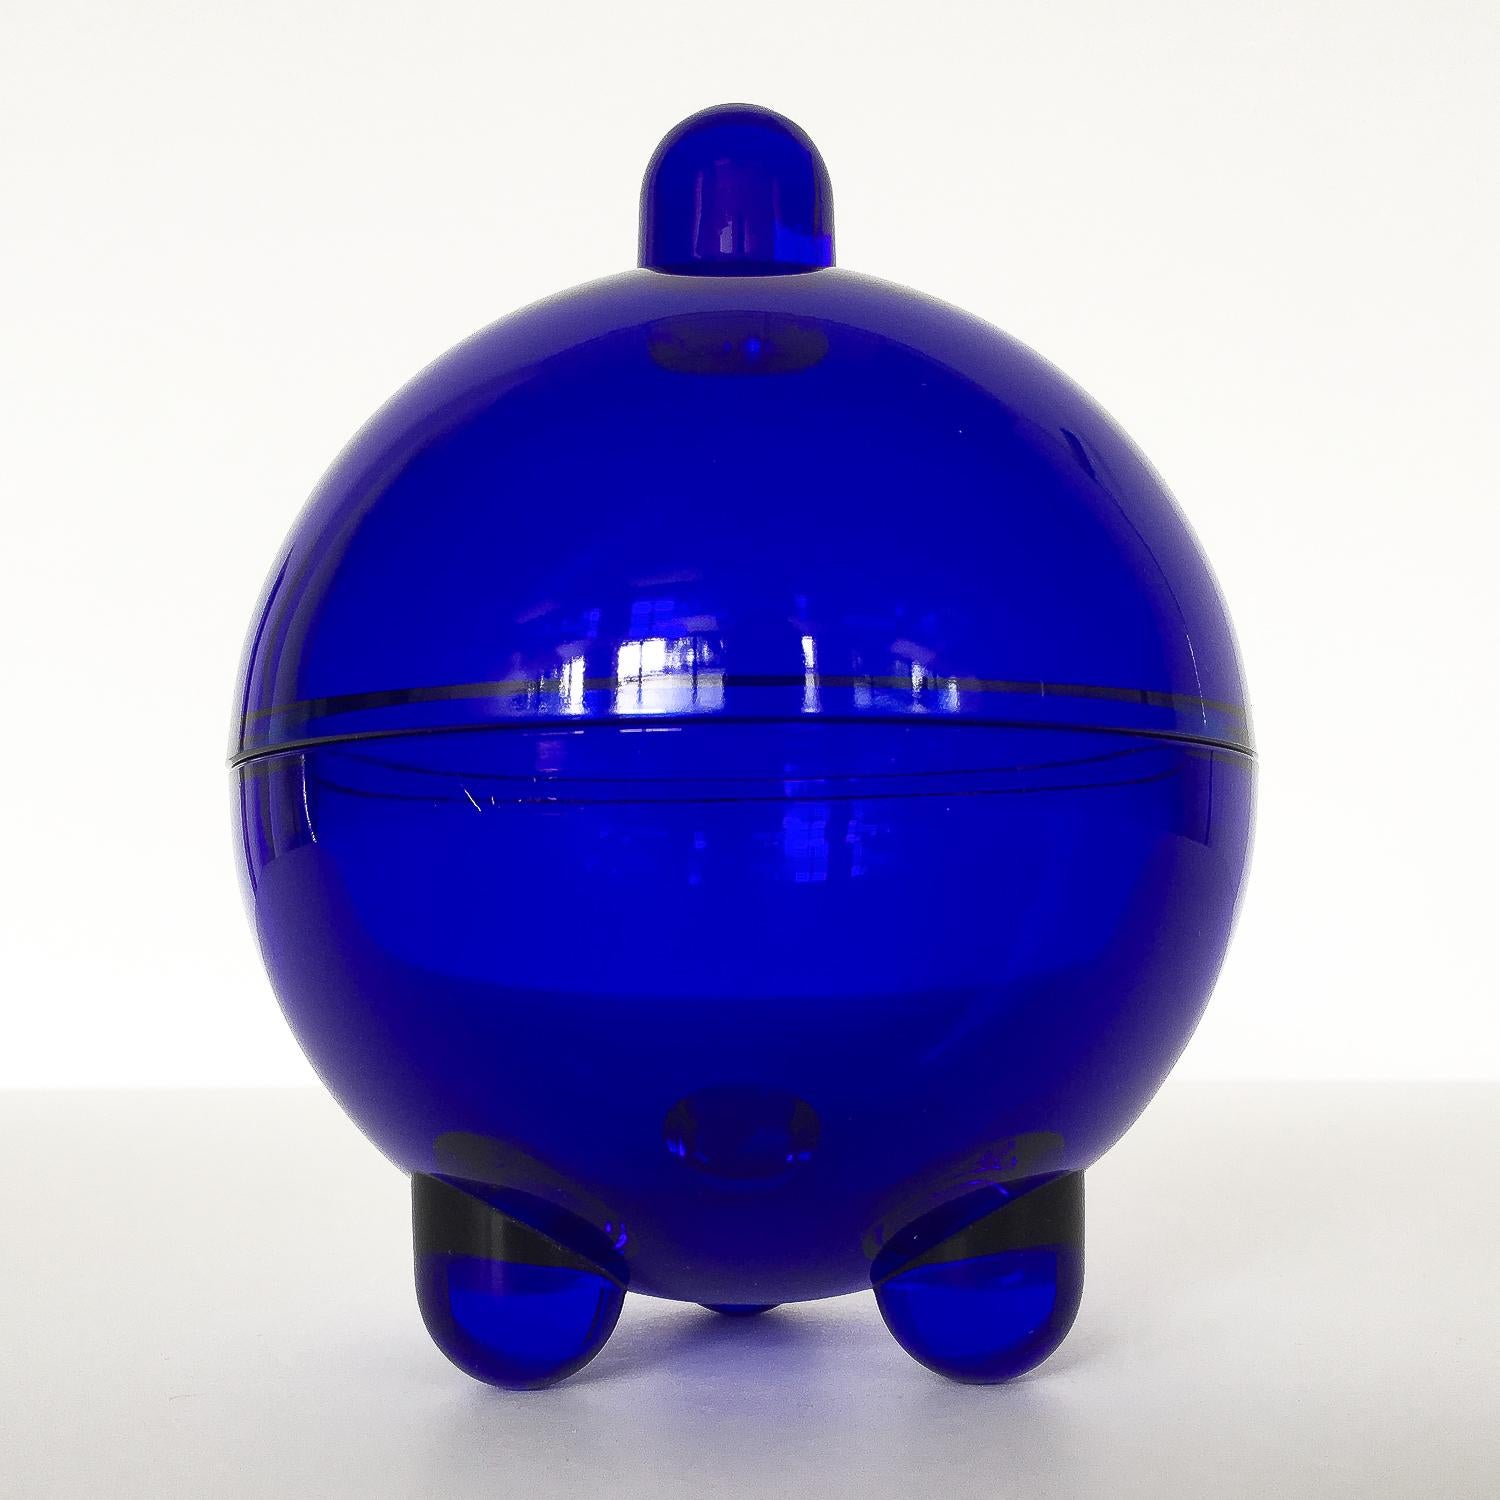 Modernist cobalt blue glass covered candy dish / lidded bowl by V. Nason, Italy, circa 1980s. Spherical in form with tripod footed base and singular nipple handle. Reminiscent of designs by Ettore Sottsass and the Postmodernism era. Signature